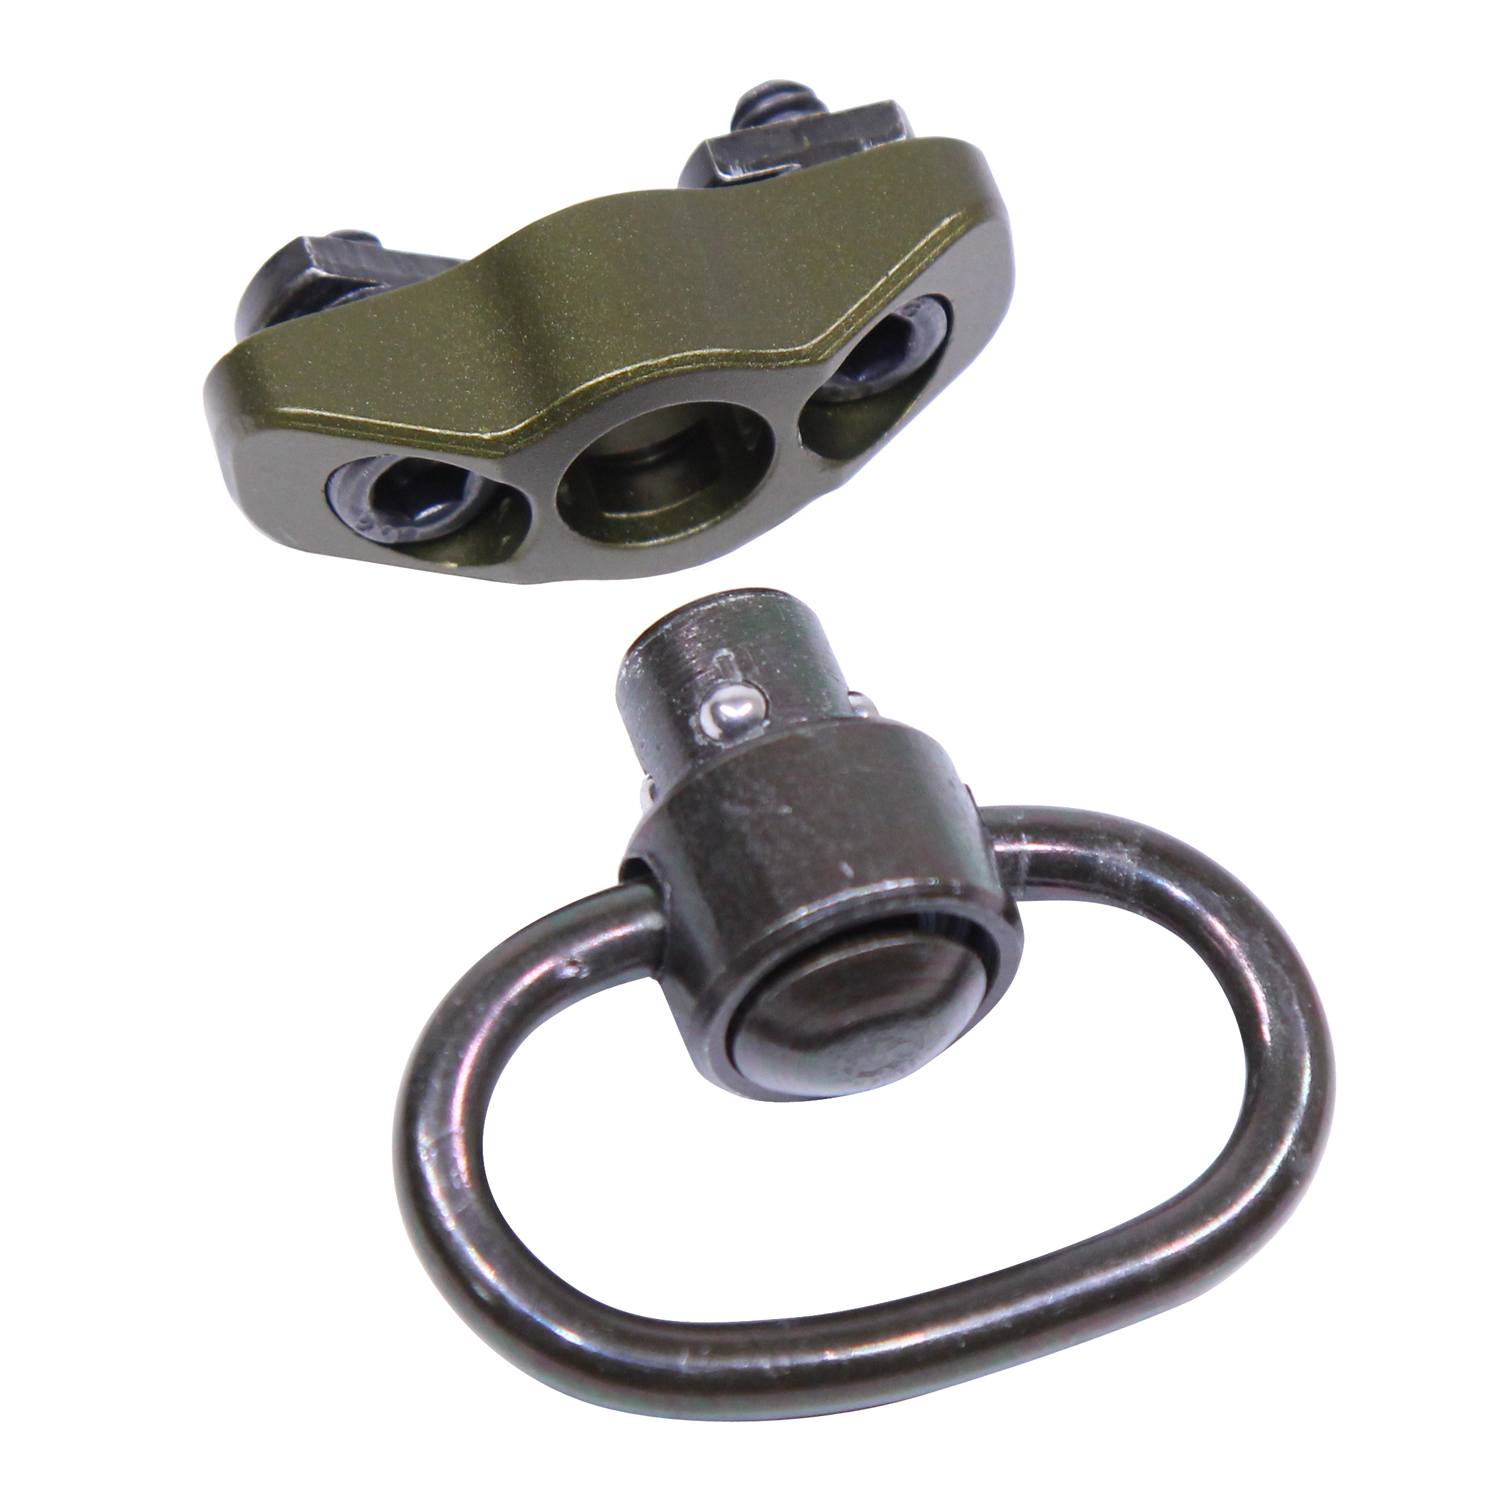 QD Swivel With Adapter For M-LOK System (Gen 2) (Anodized Green)